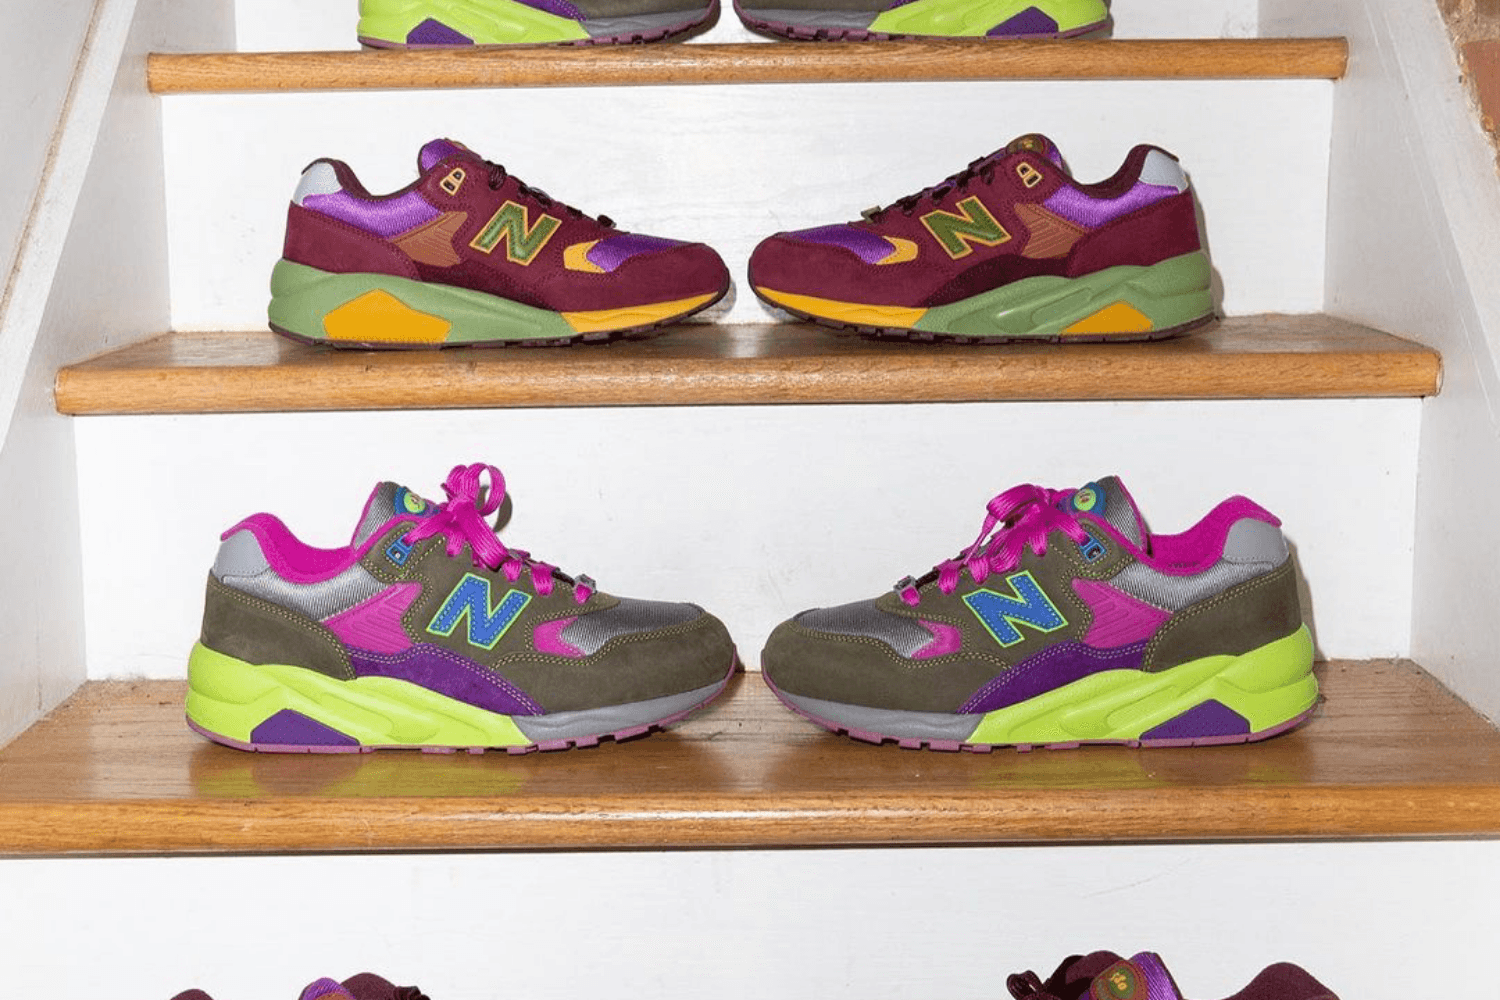 Release reminder: Stray Rats x New Balance 580 pack